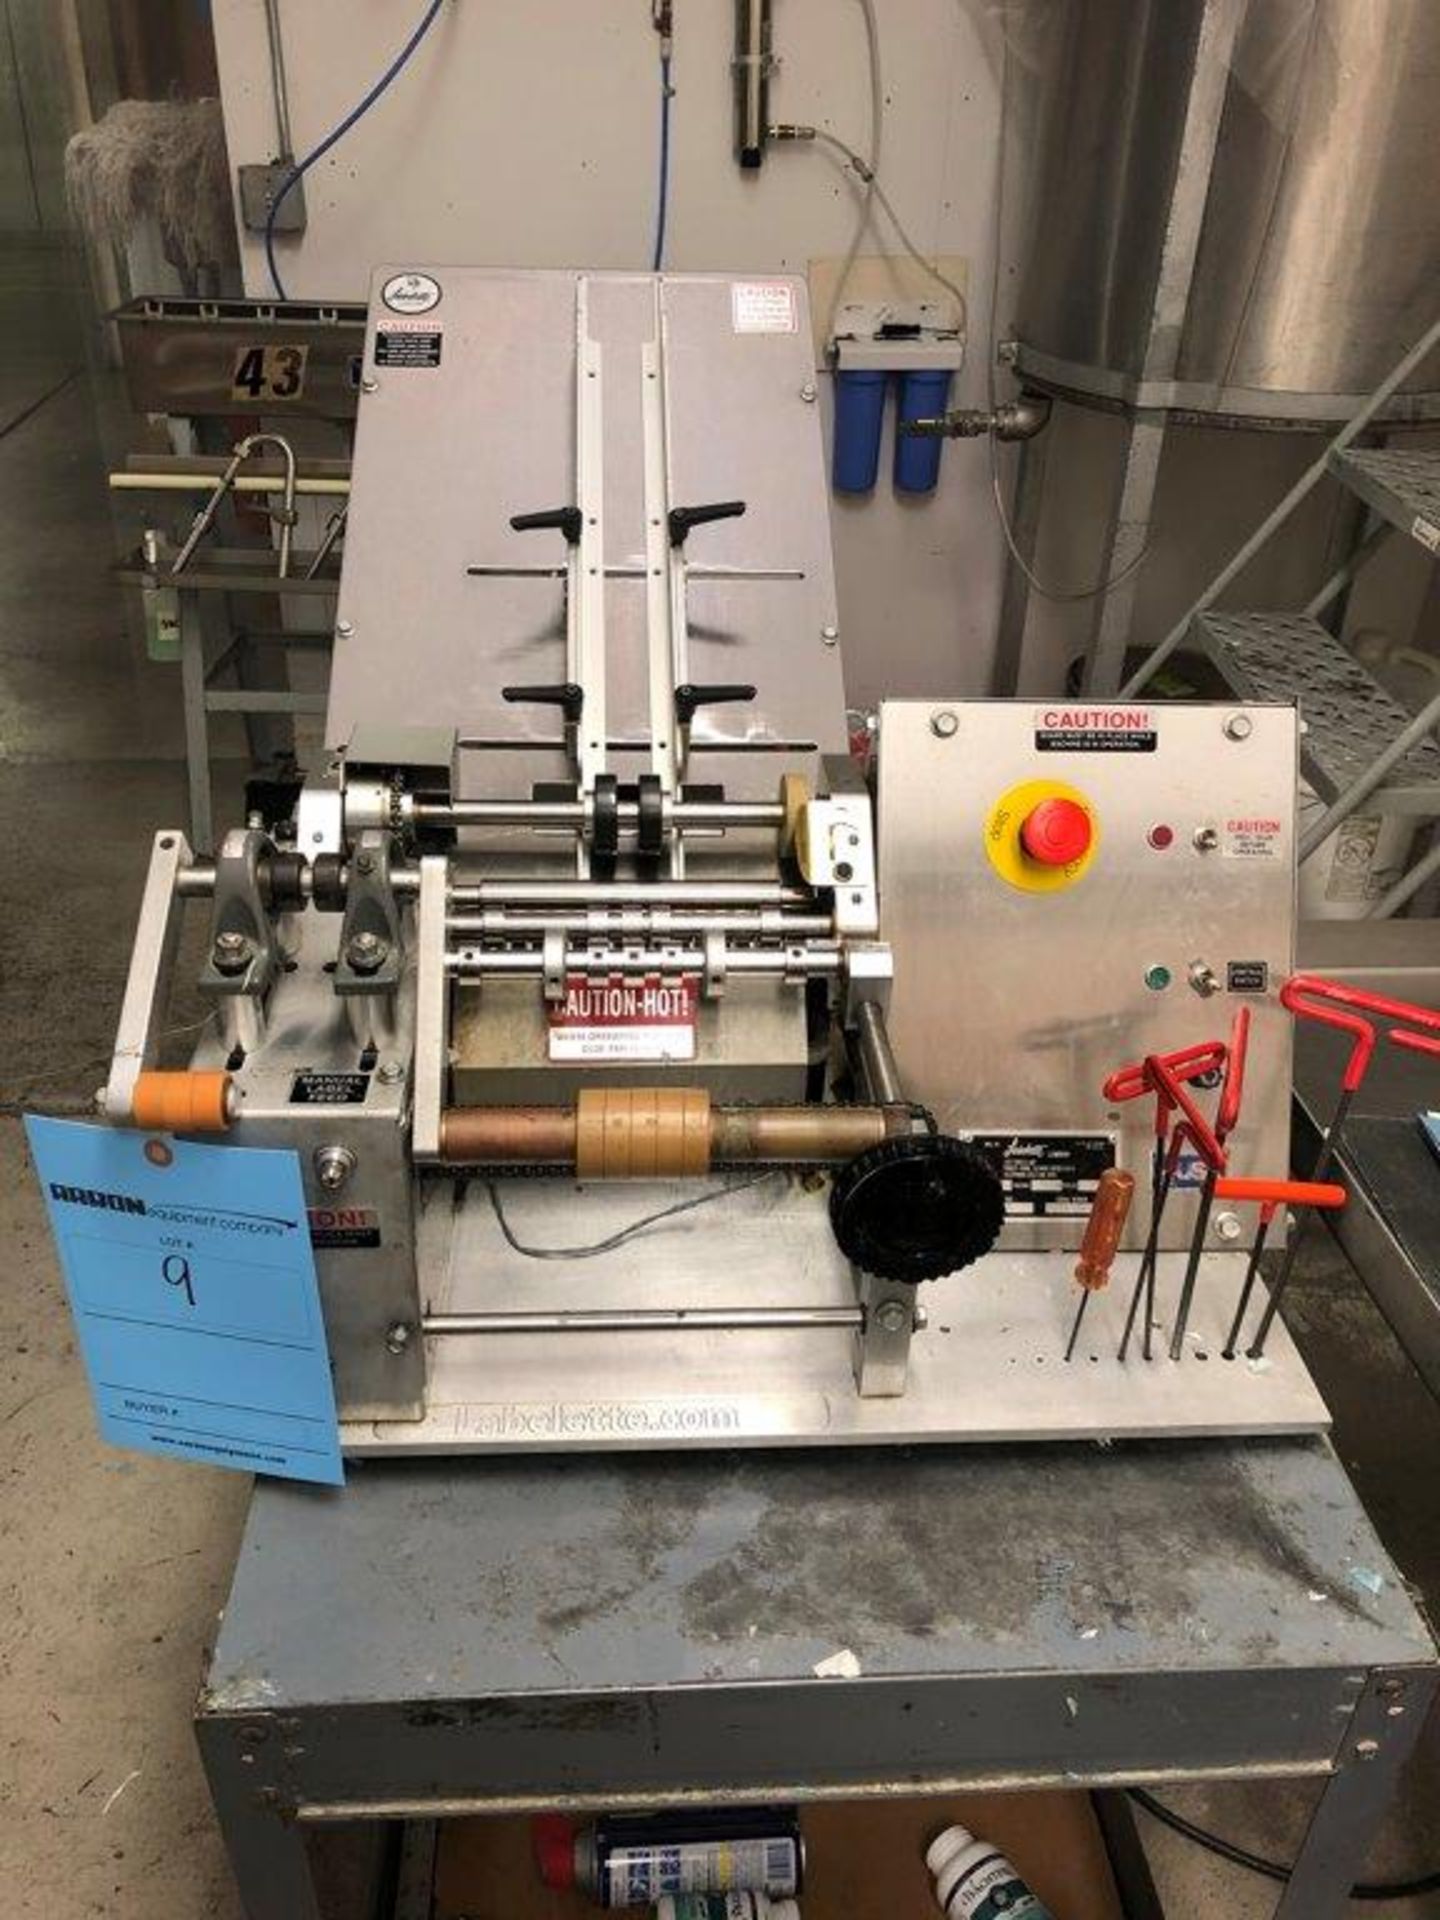 Labelette Semi-Automatic Hot Glue Labeler Model 20, S/N 117664, Year 2001. (SUBJECT TO THE BULK